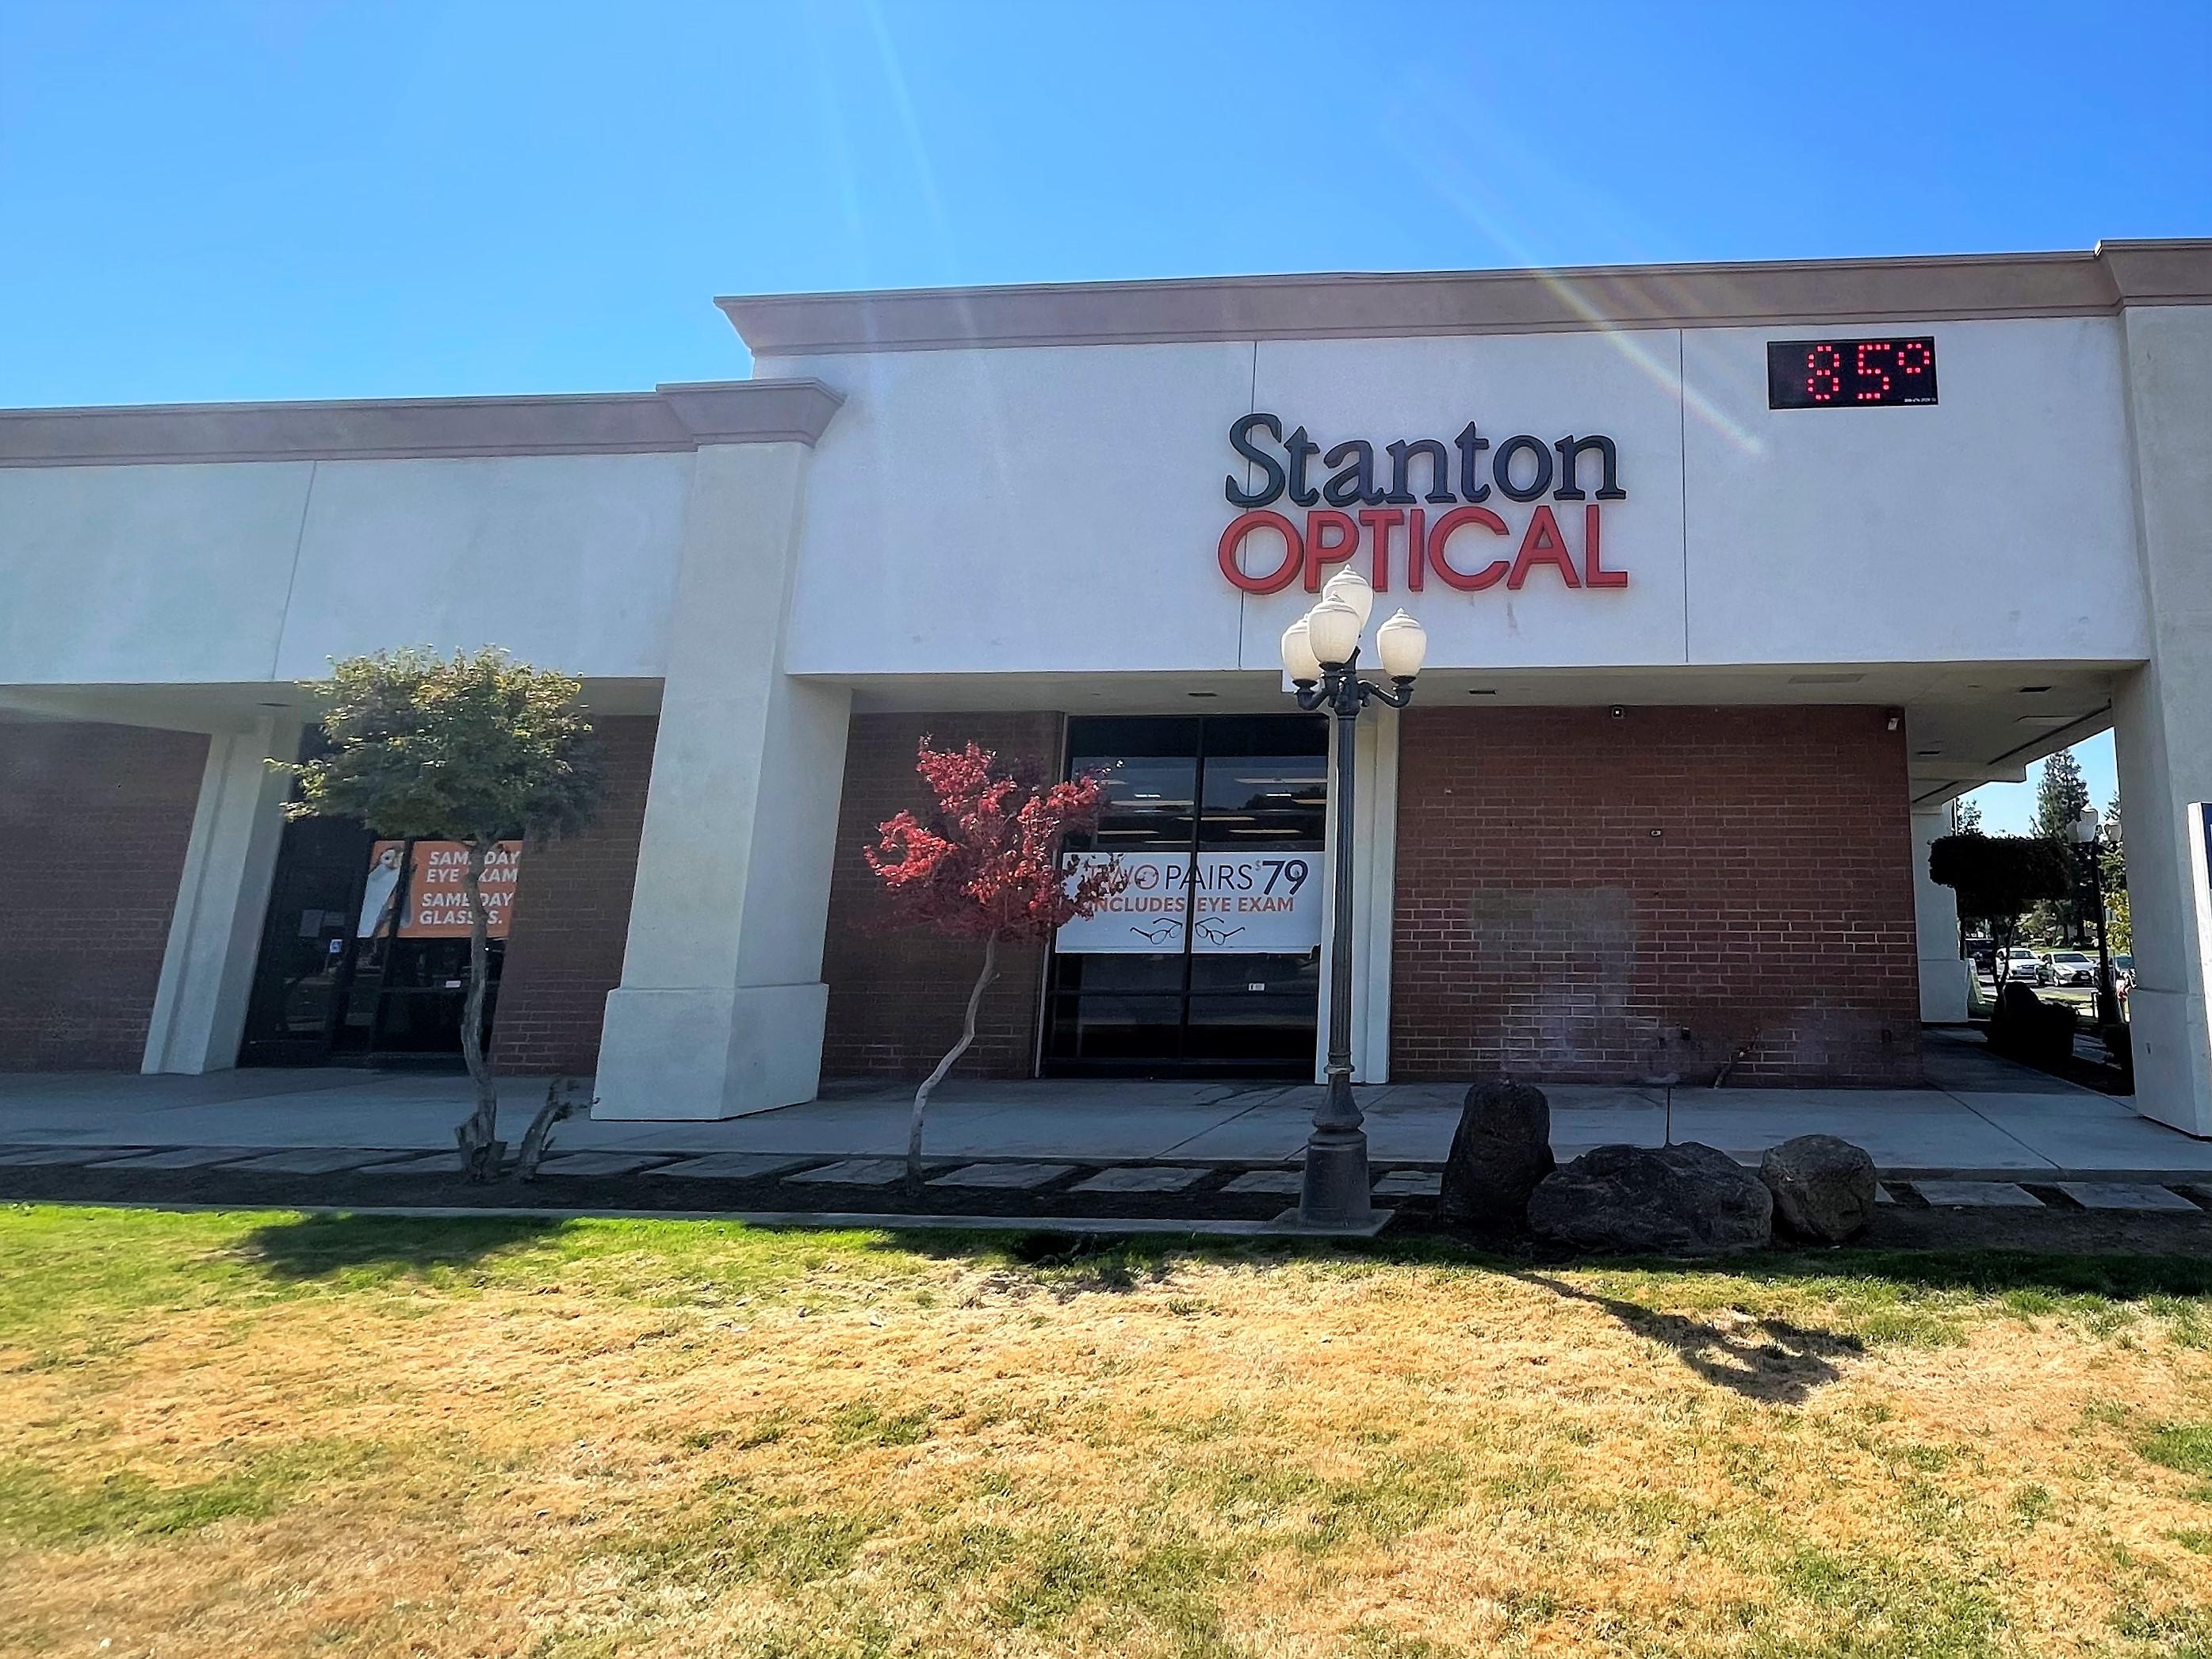 Storefront at Stanton Optical store in Merced, CA 95348